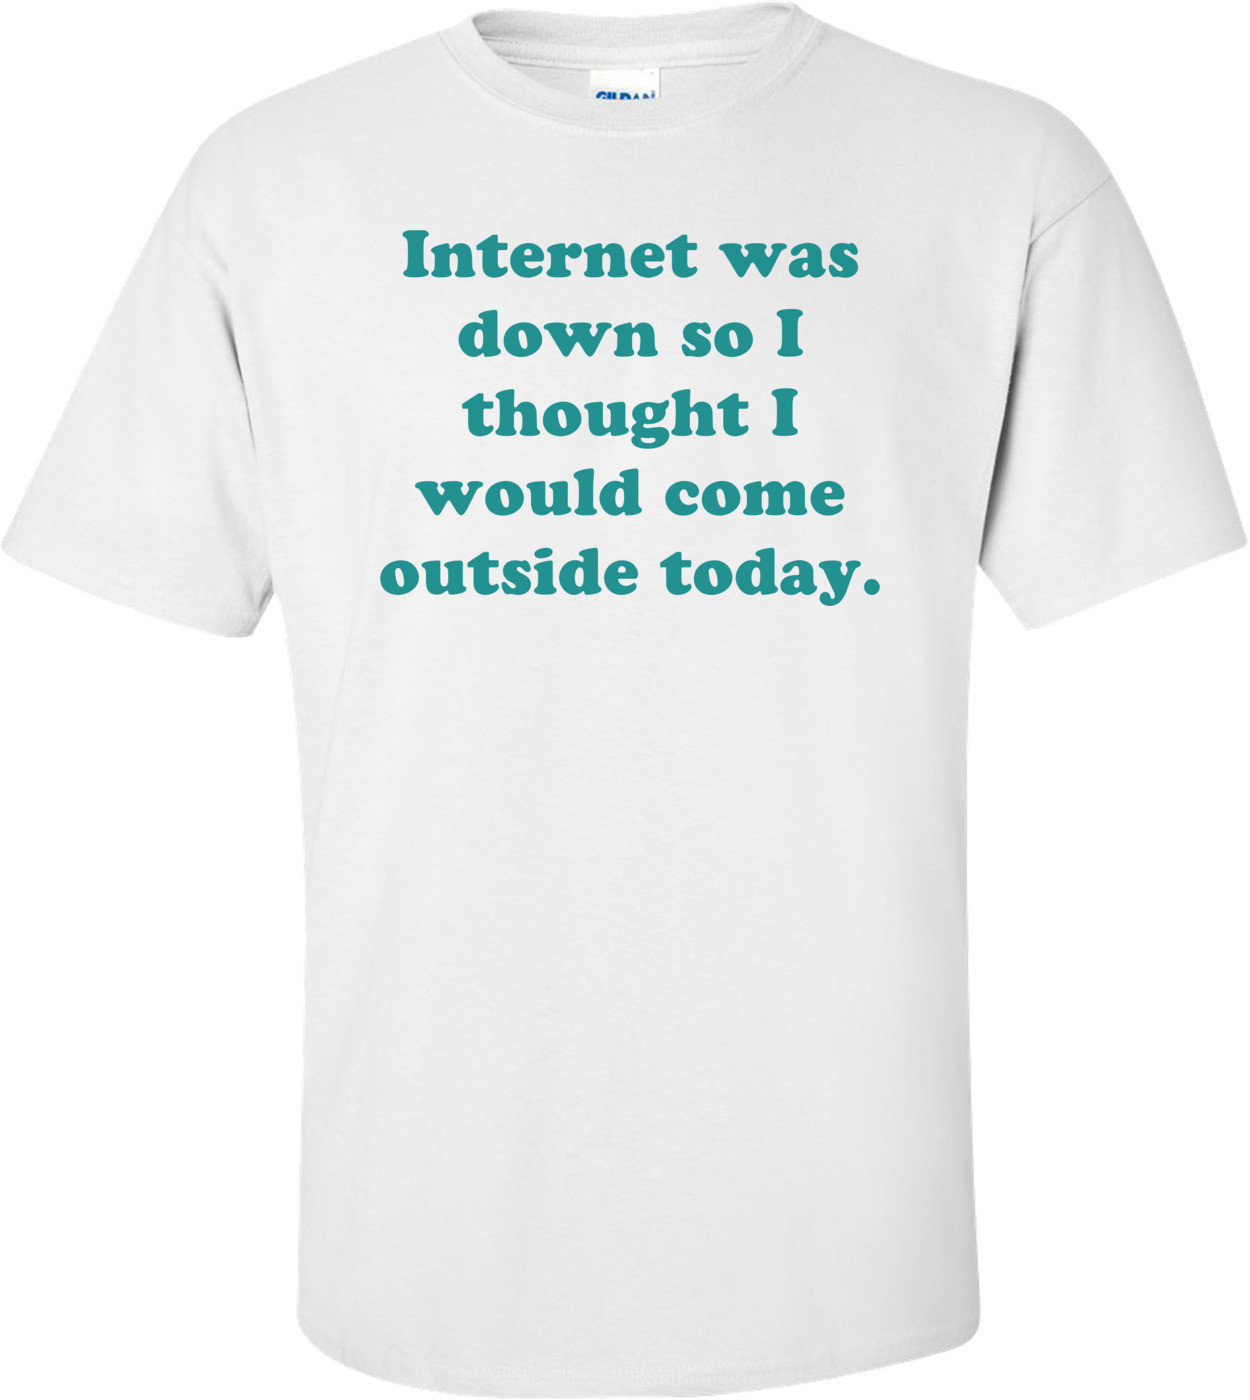 Internet was down so I thought I would come outside today. Shirt